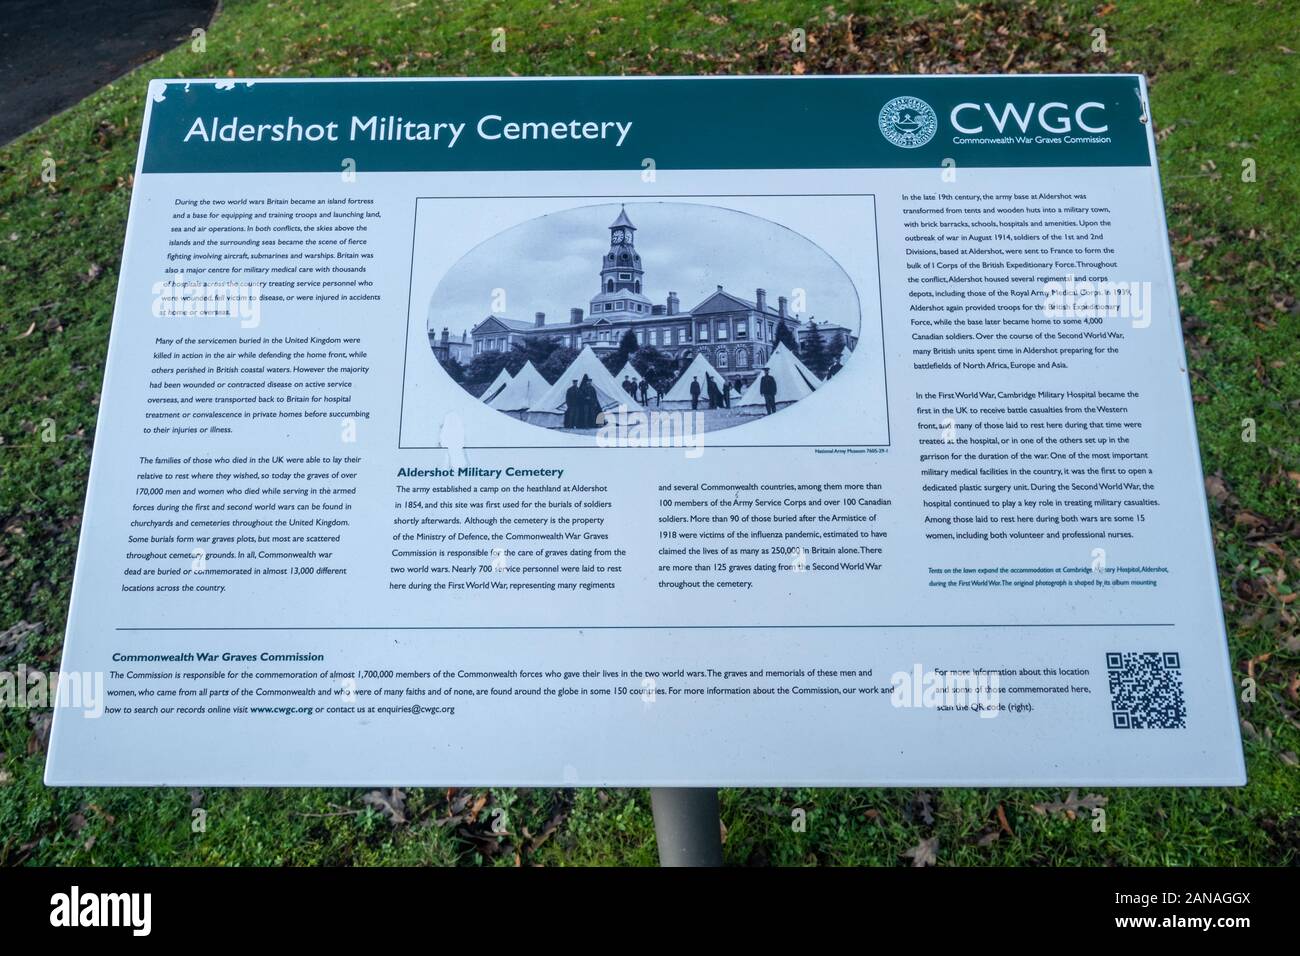 Aldershot Military Cemetery information board, Commonwealth War Graves Commission, Hampshire, UK Stock Photo